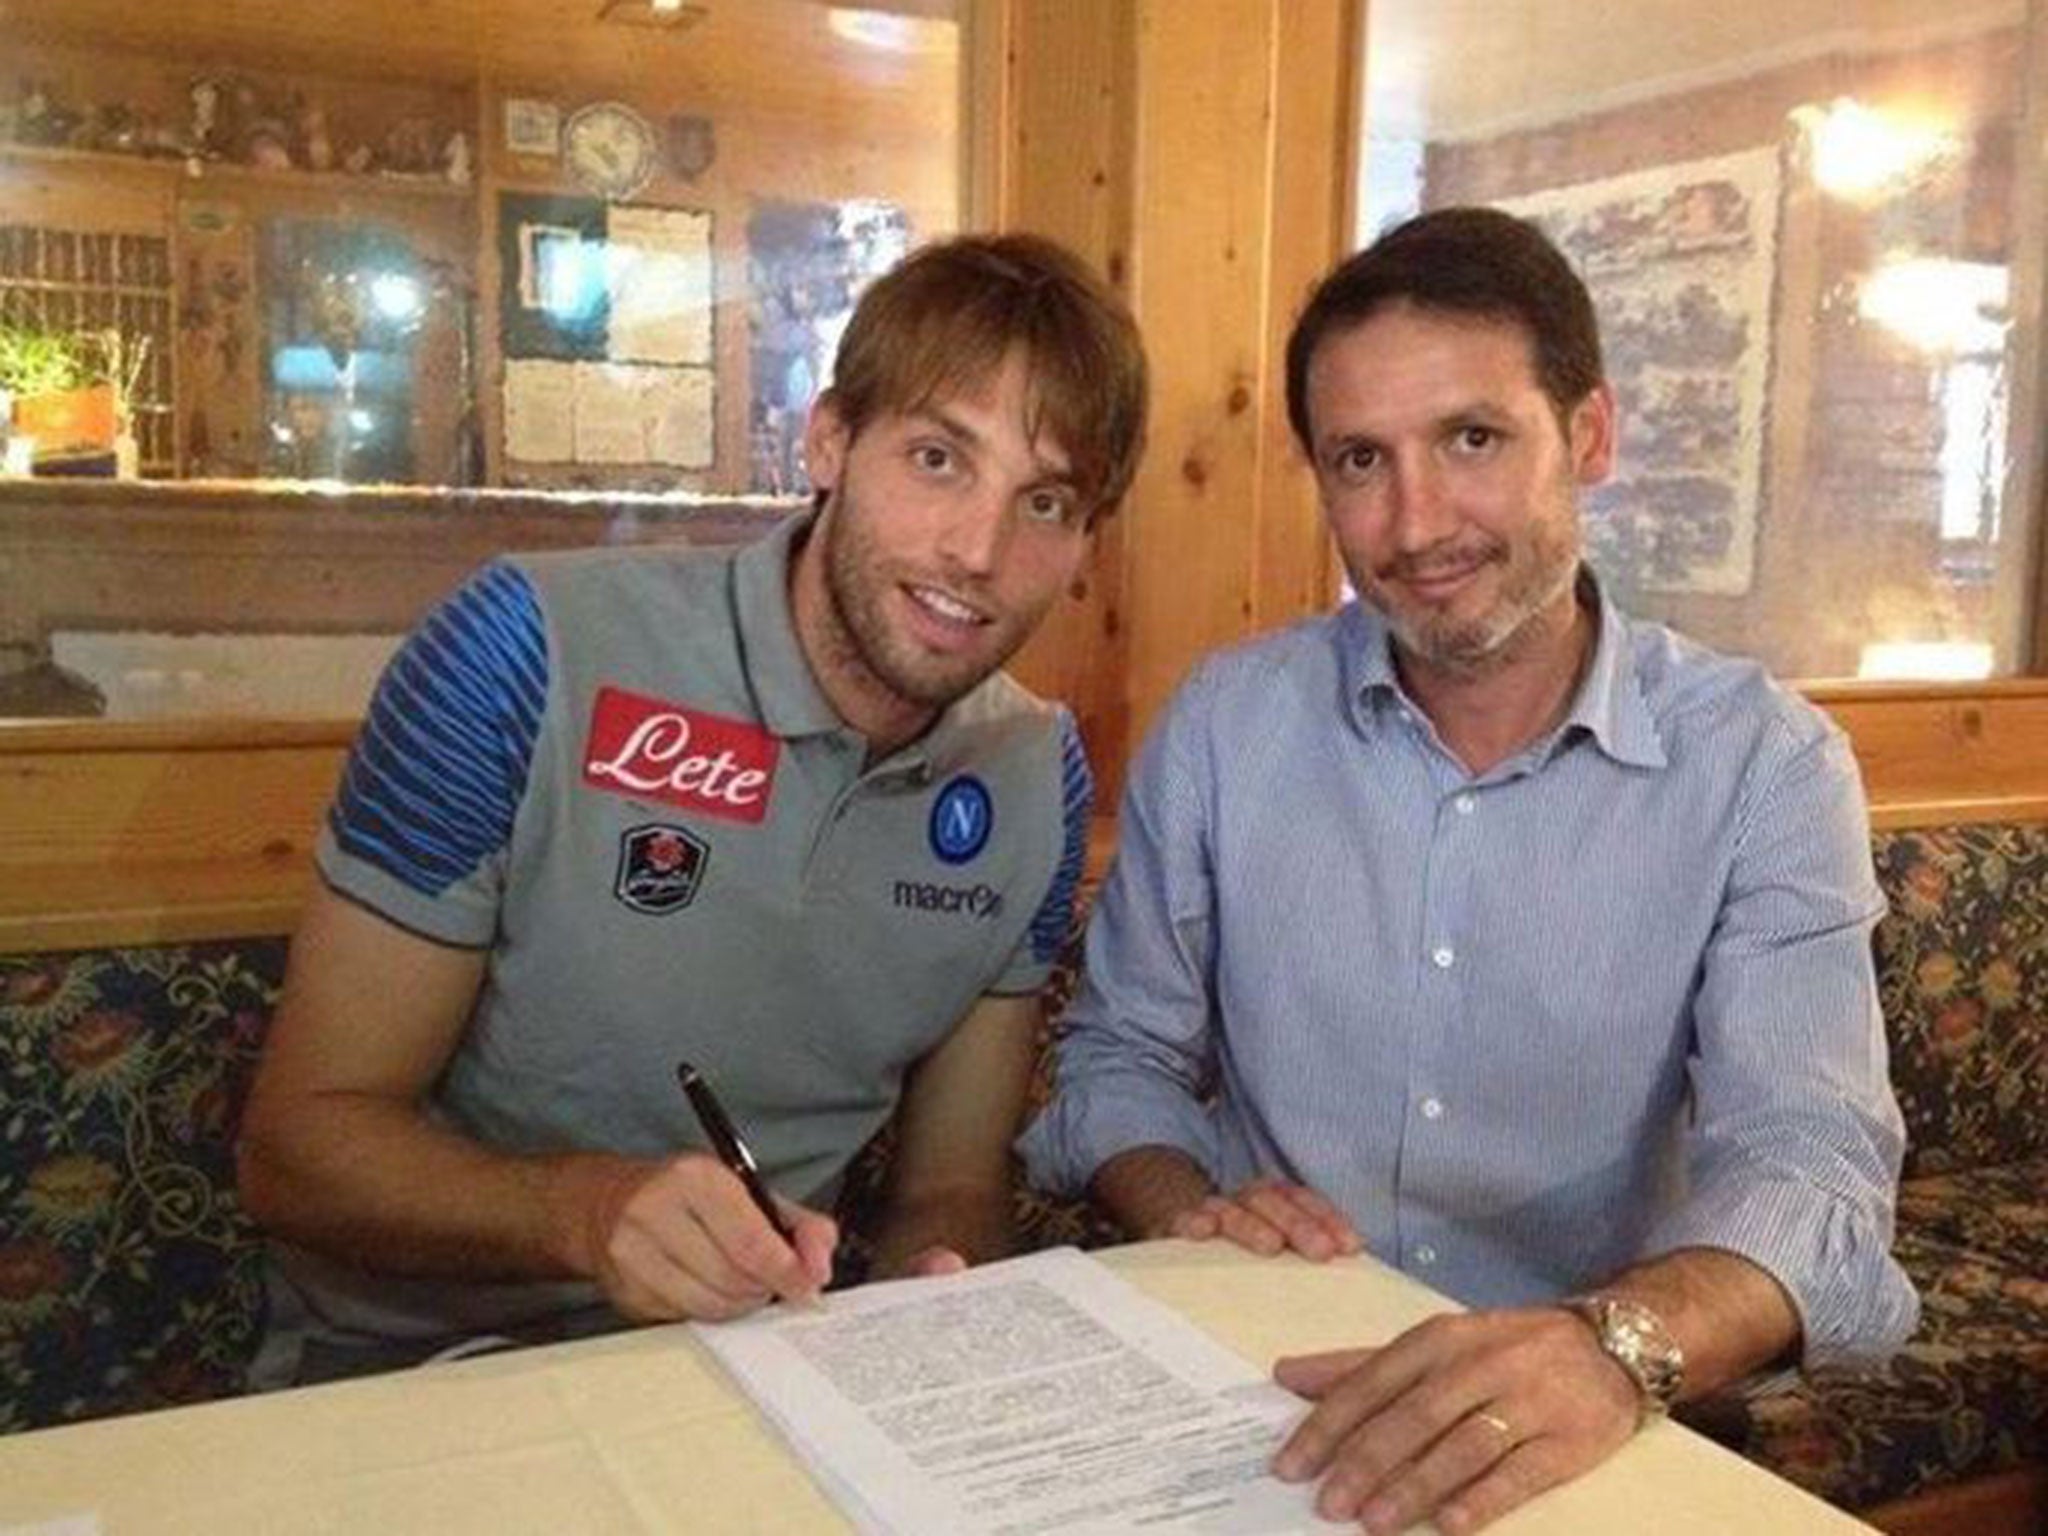 Michu has joined Napoli on a season-long loan from Swansea City